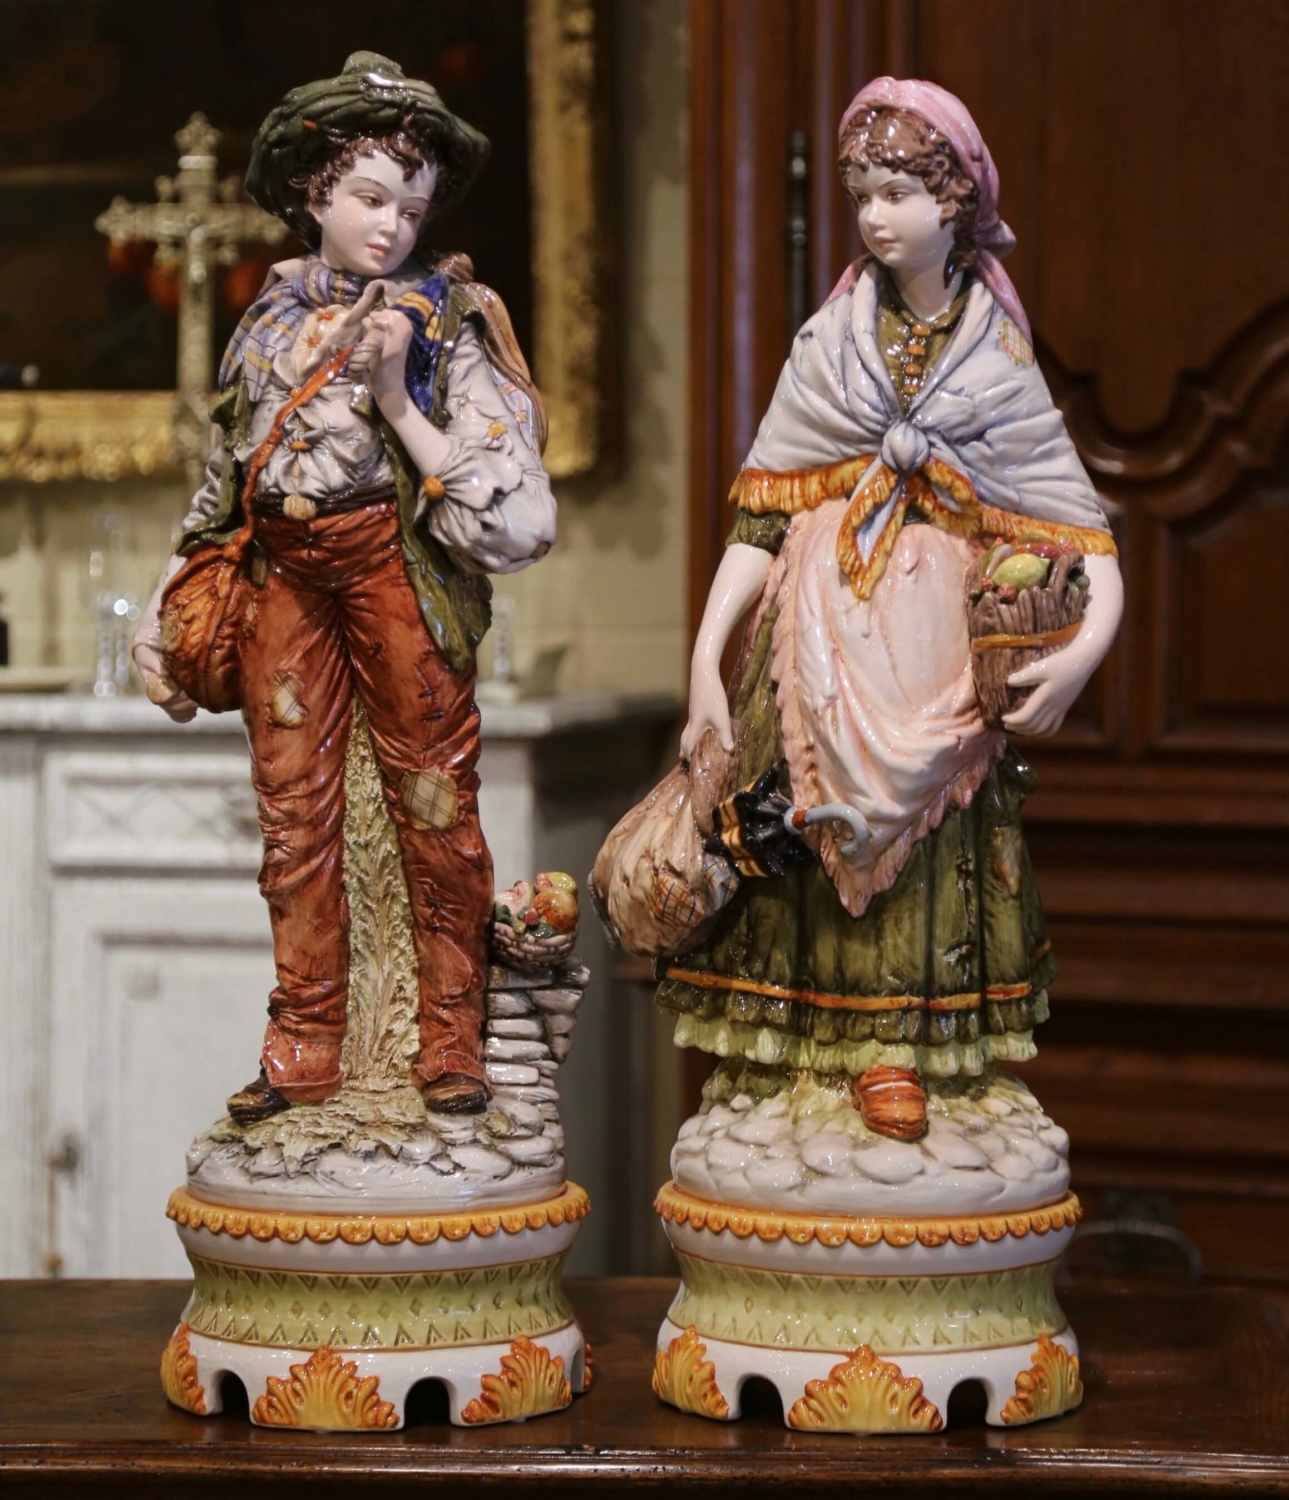 Pair of 20th Century Italian Hand-Painted Porcelain Figurine Statues -  Country French Interiors